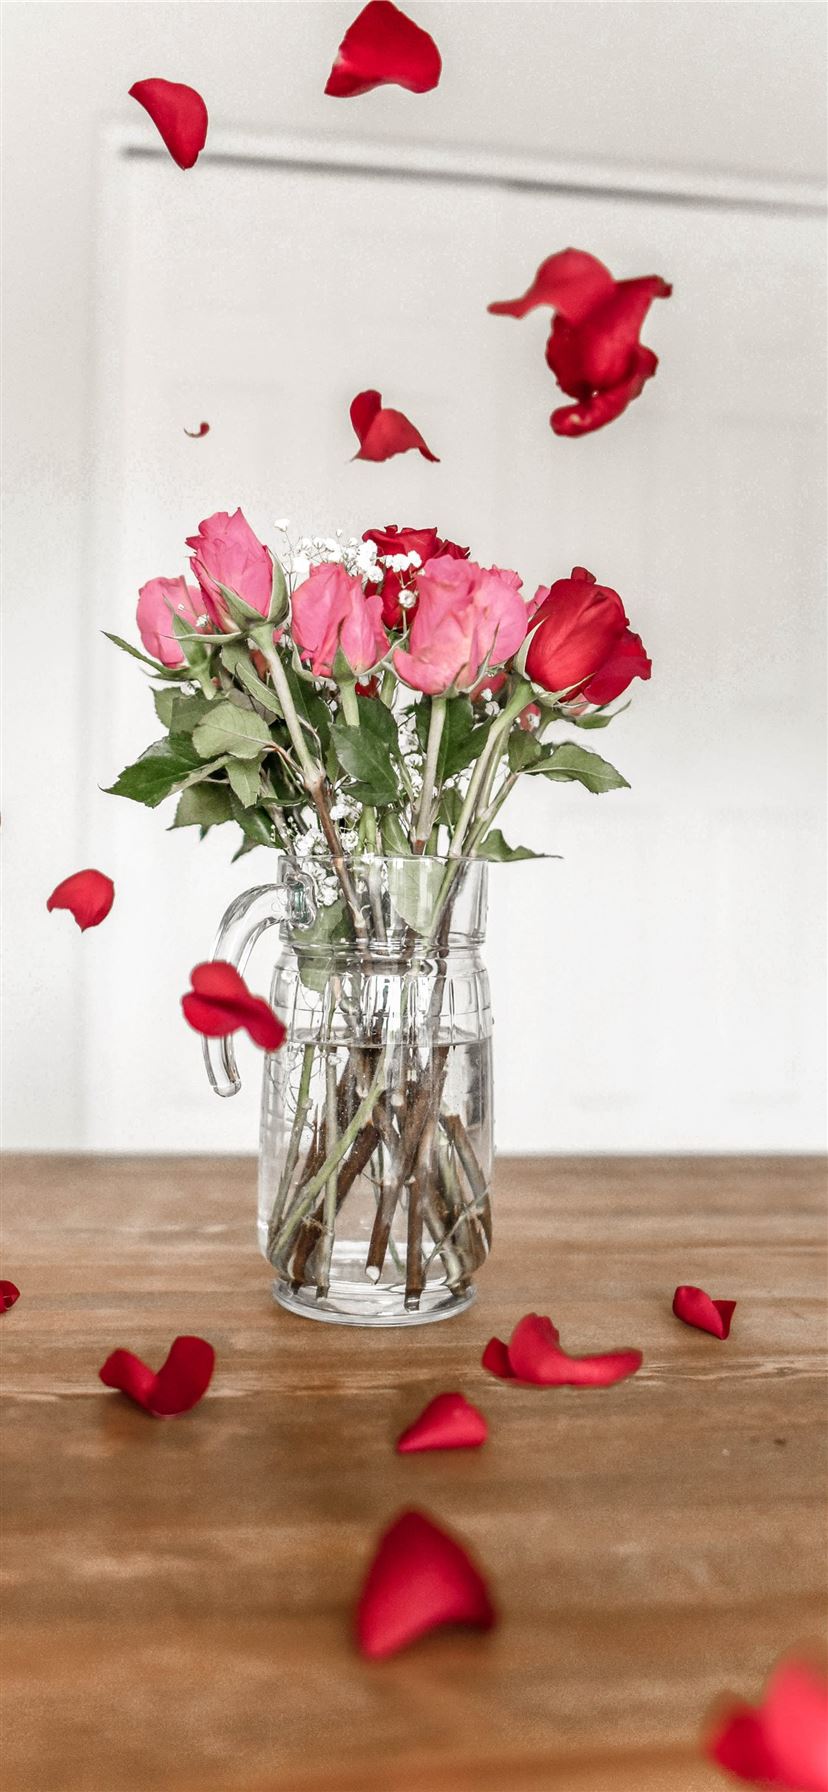 pink and red roses on clear glass vase iPhone 11 wallpaper 